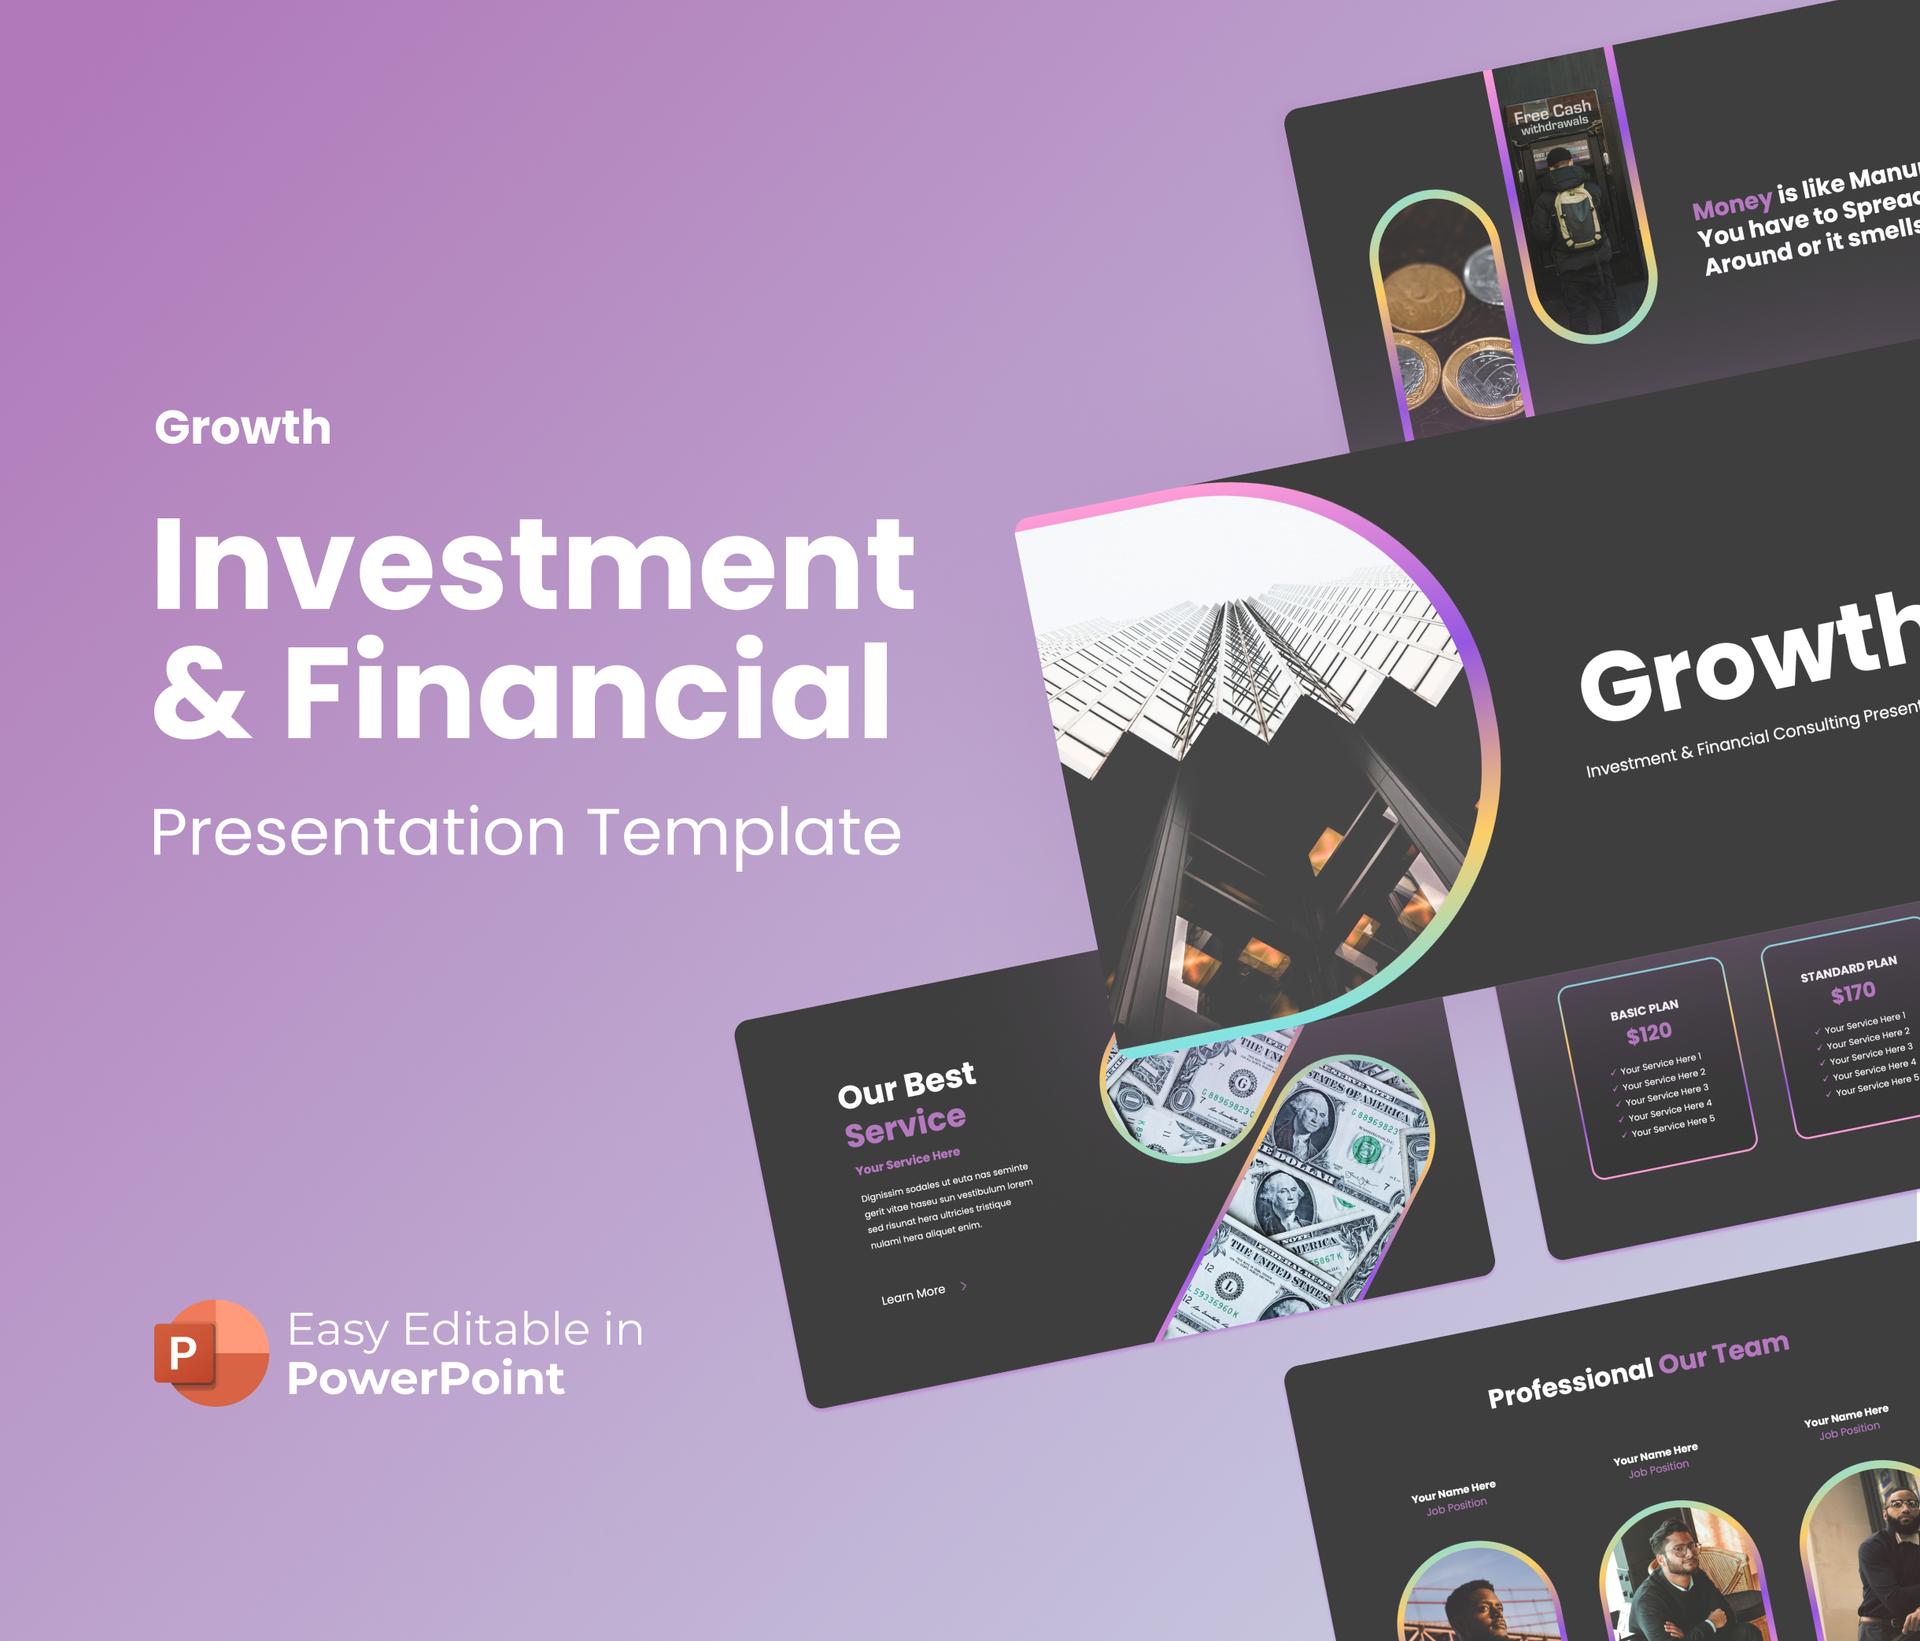 Growth - Investment &Financial Consulting Presentation.